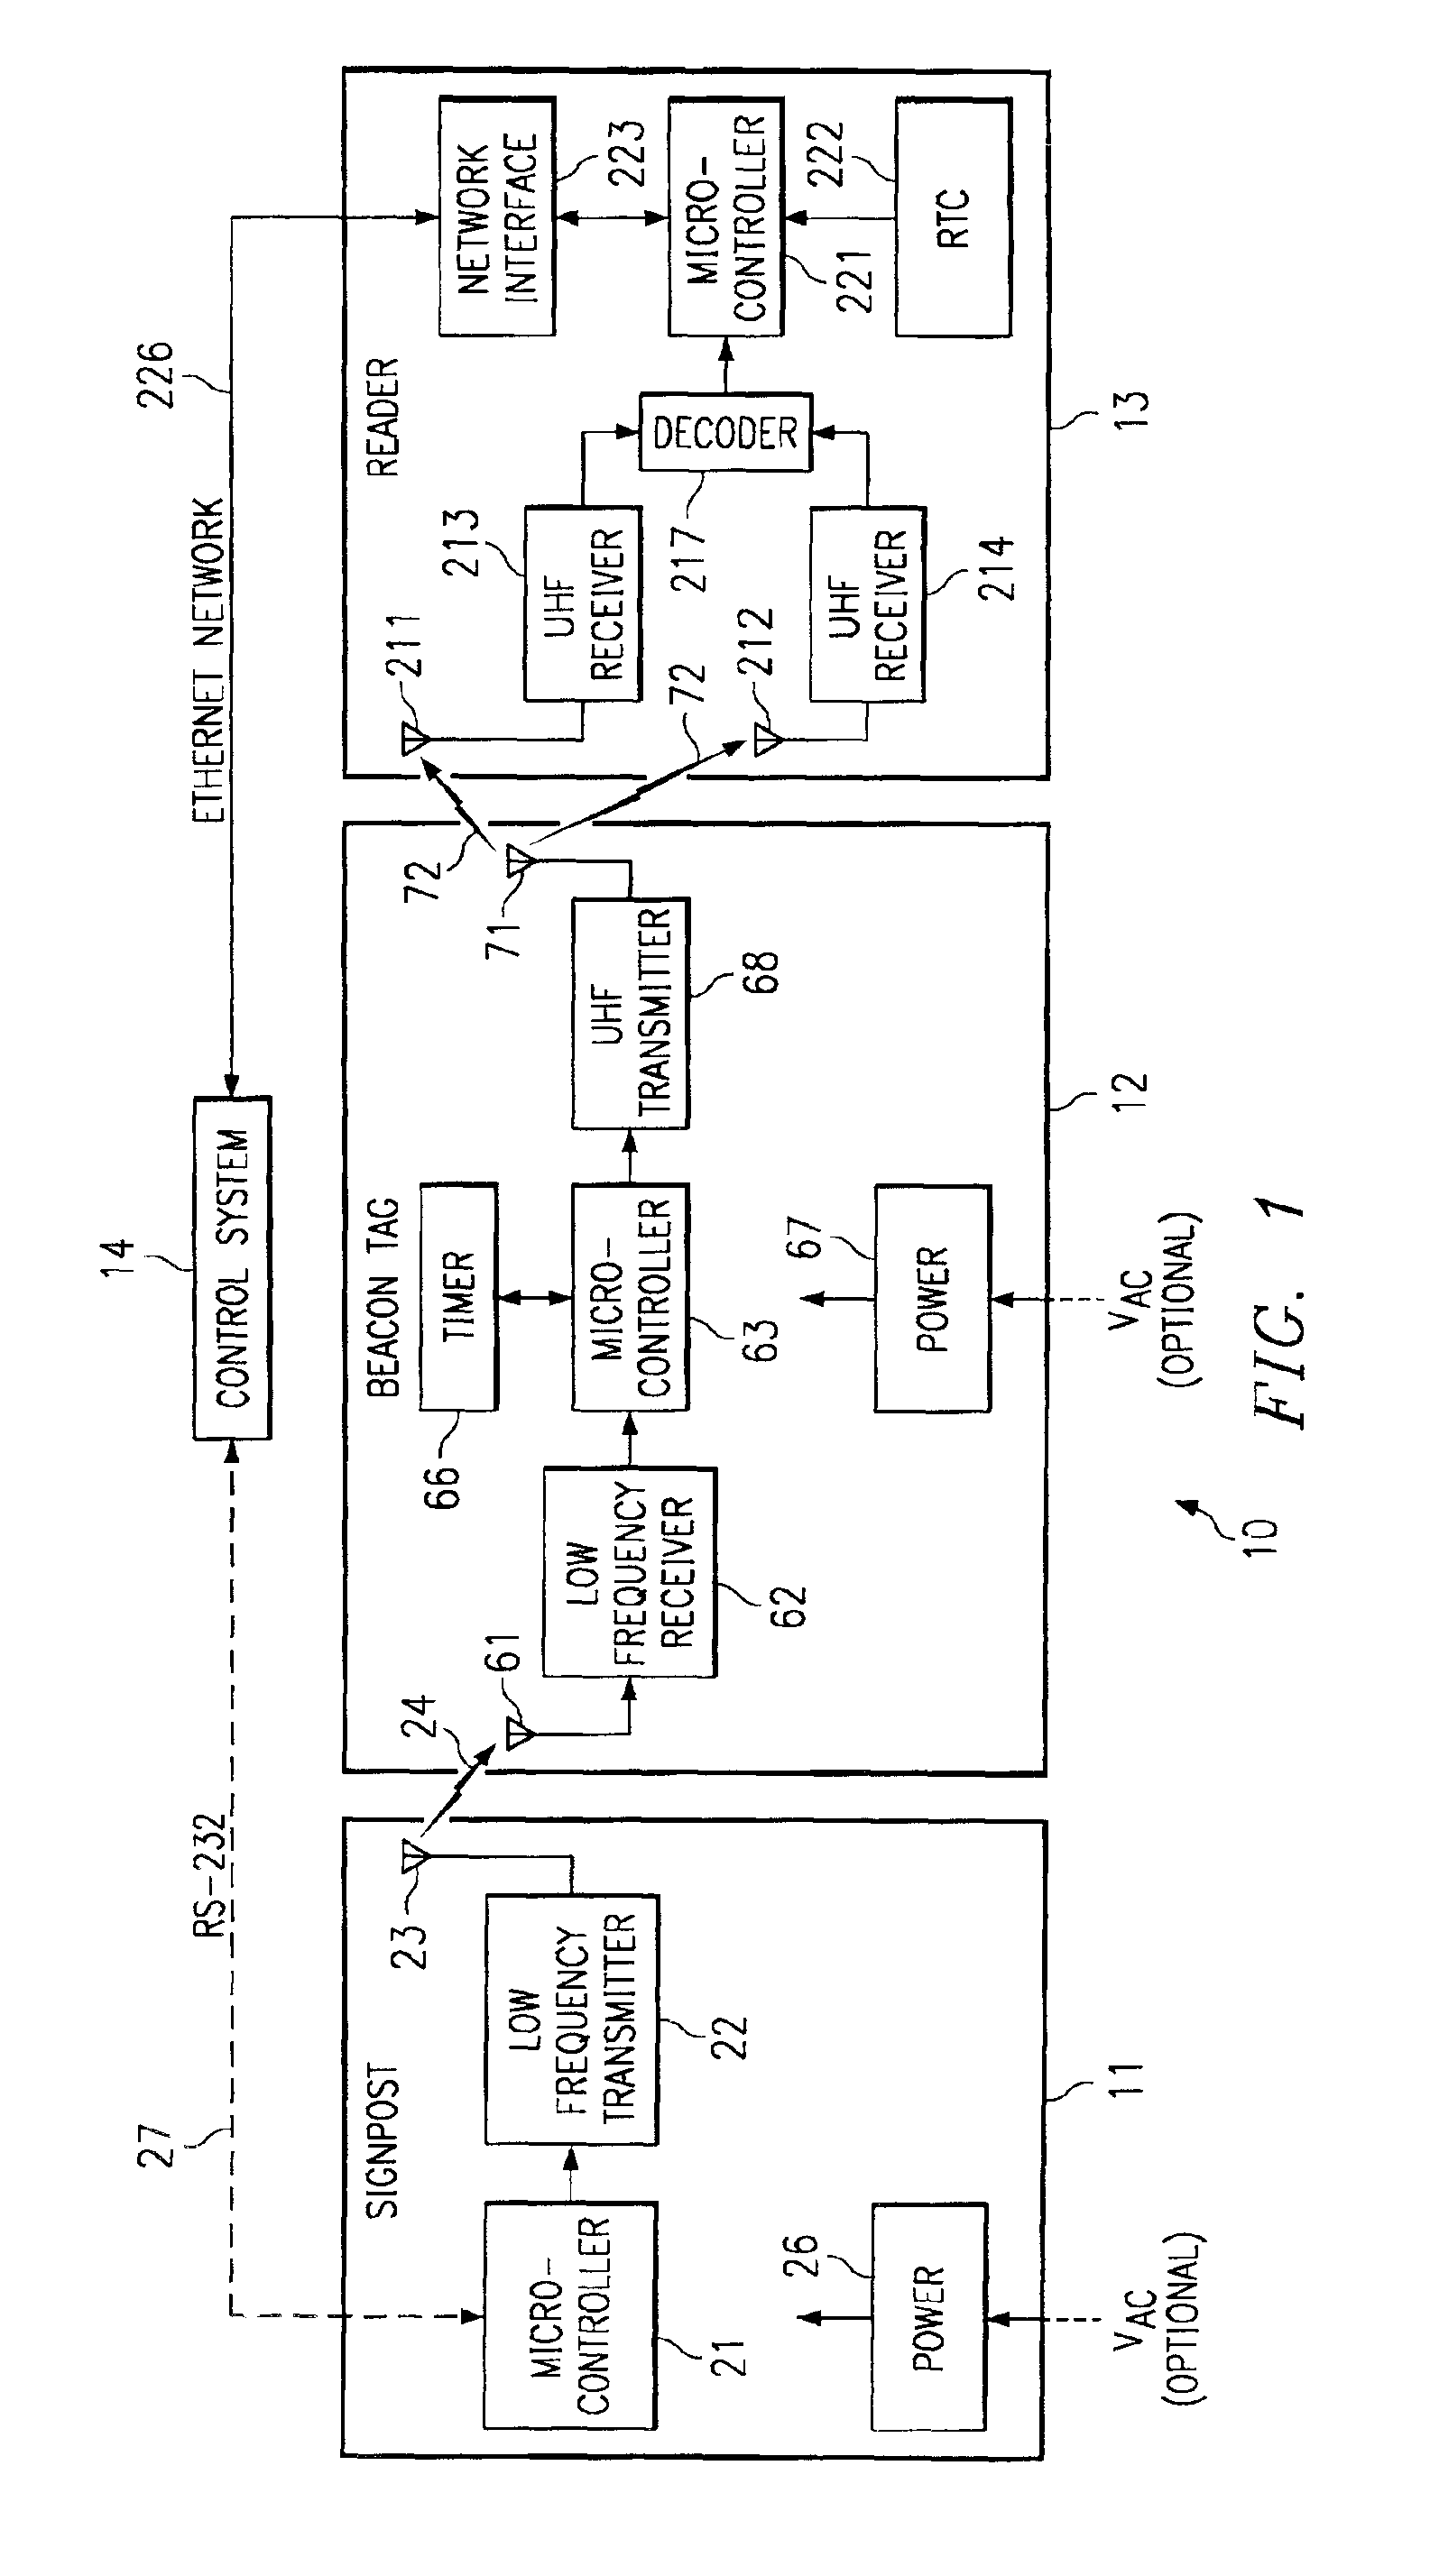 Method and apparatus for varying signals transmitted by a tag